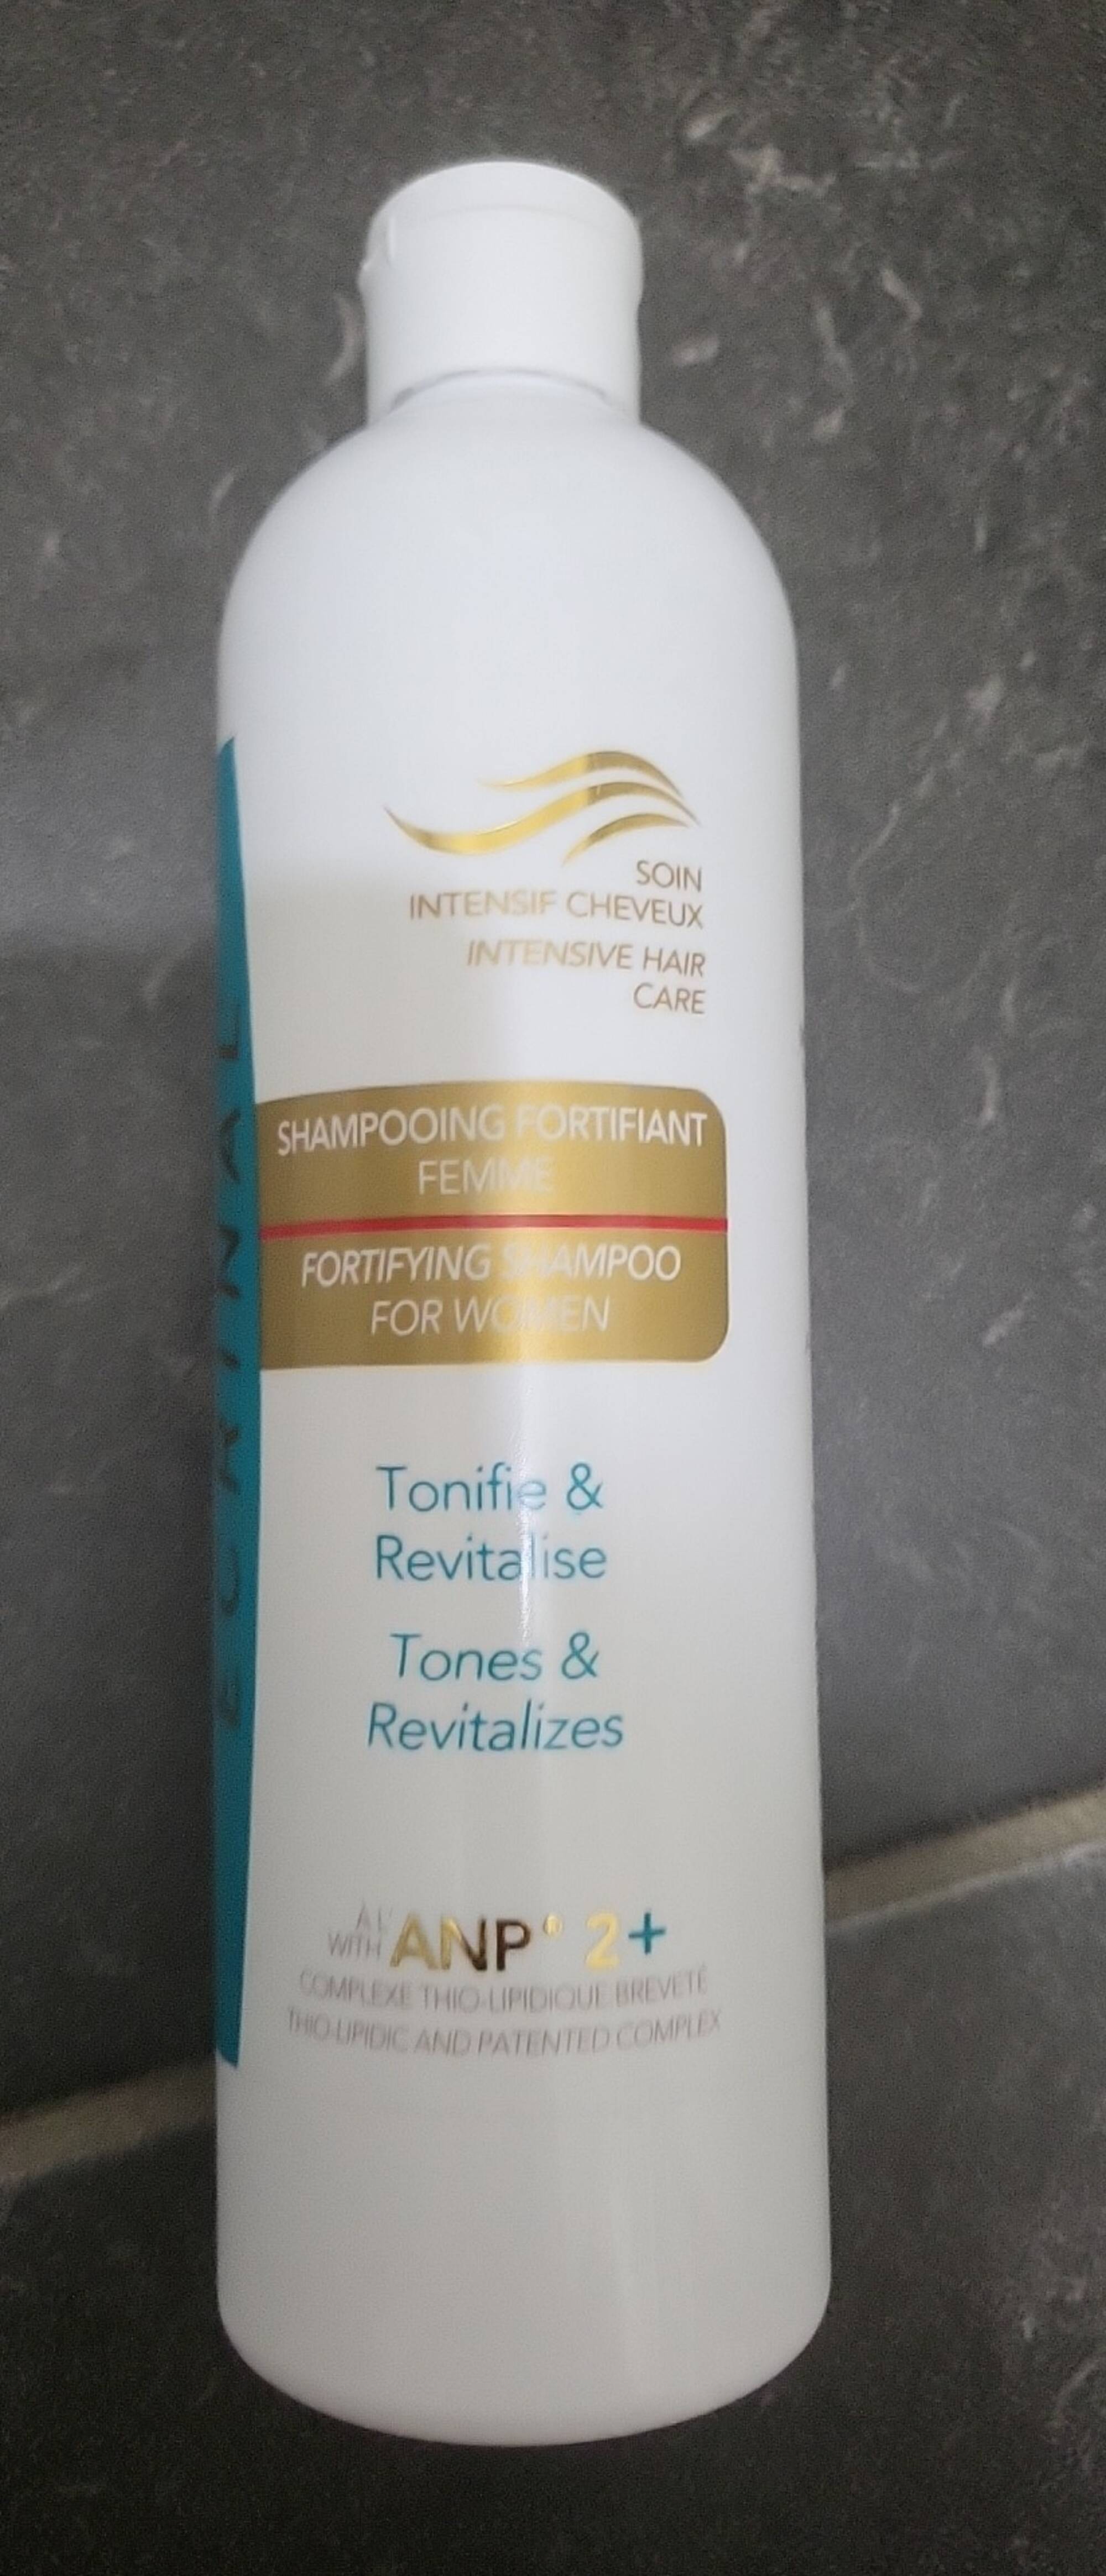 ECRINAL - Shampooing fortifiant femme